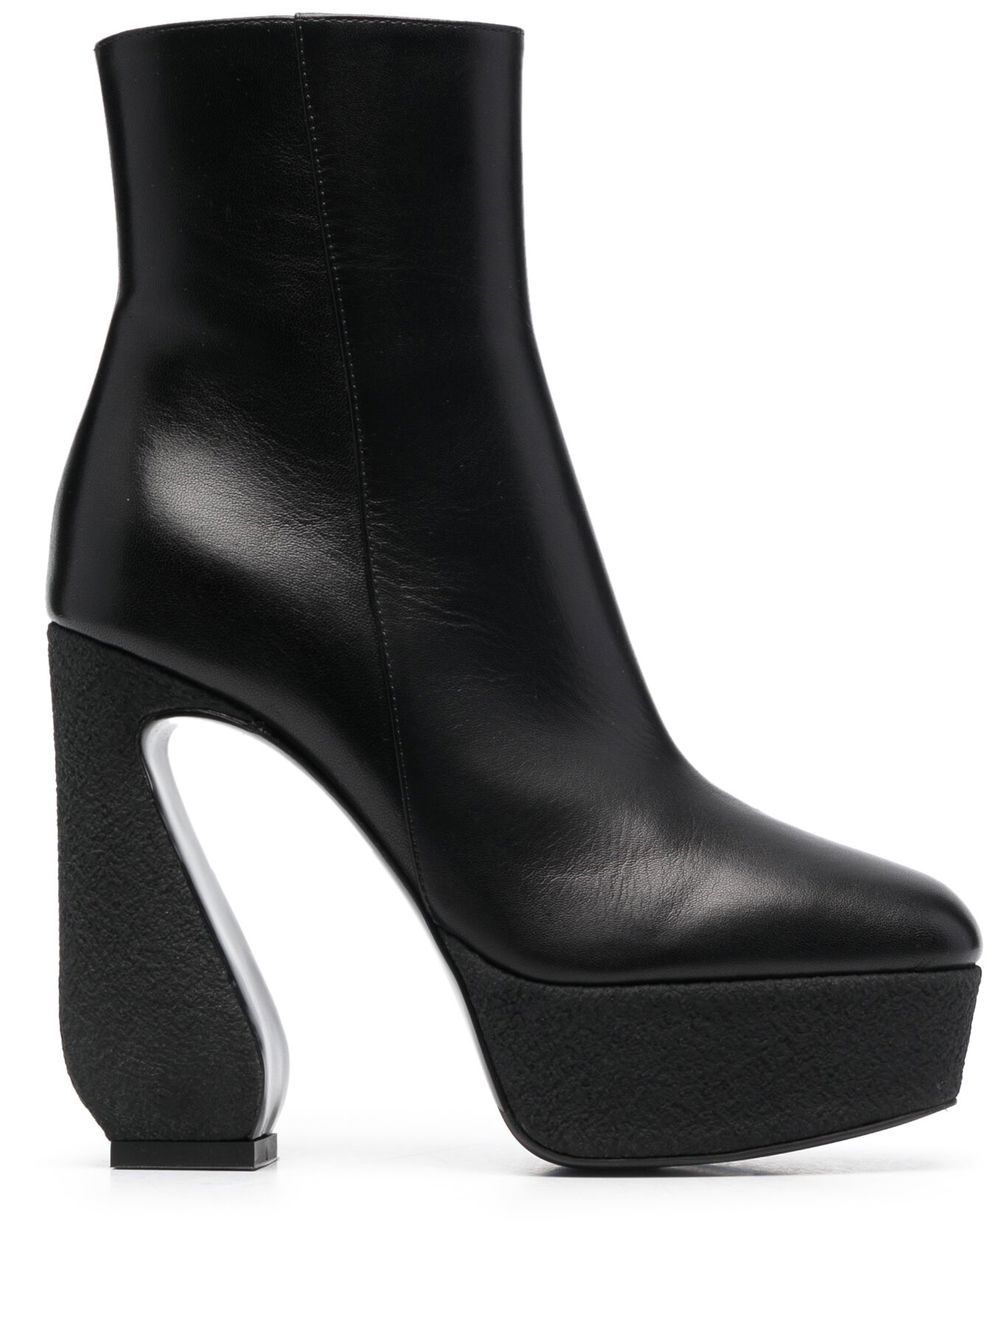 SI ROSSI 125MM PLATFORM ANKLE BOOTS